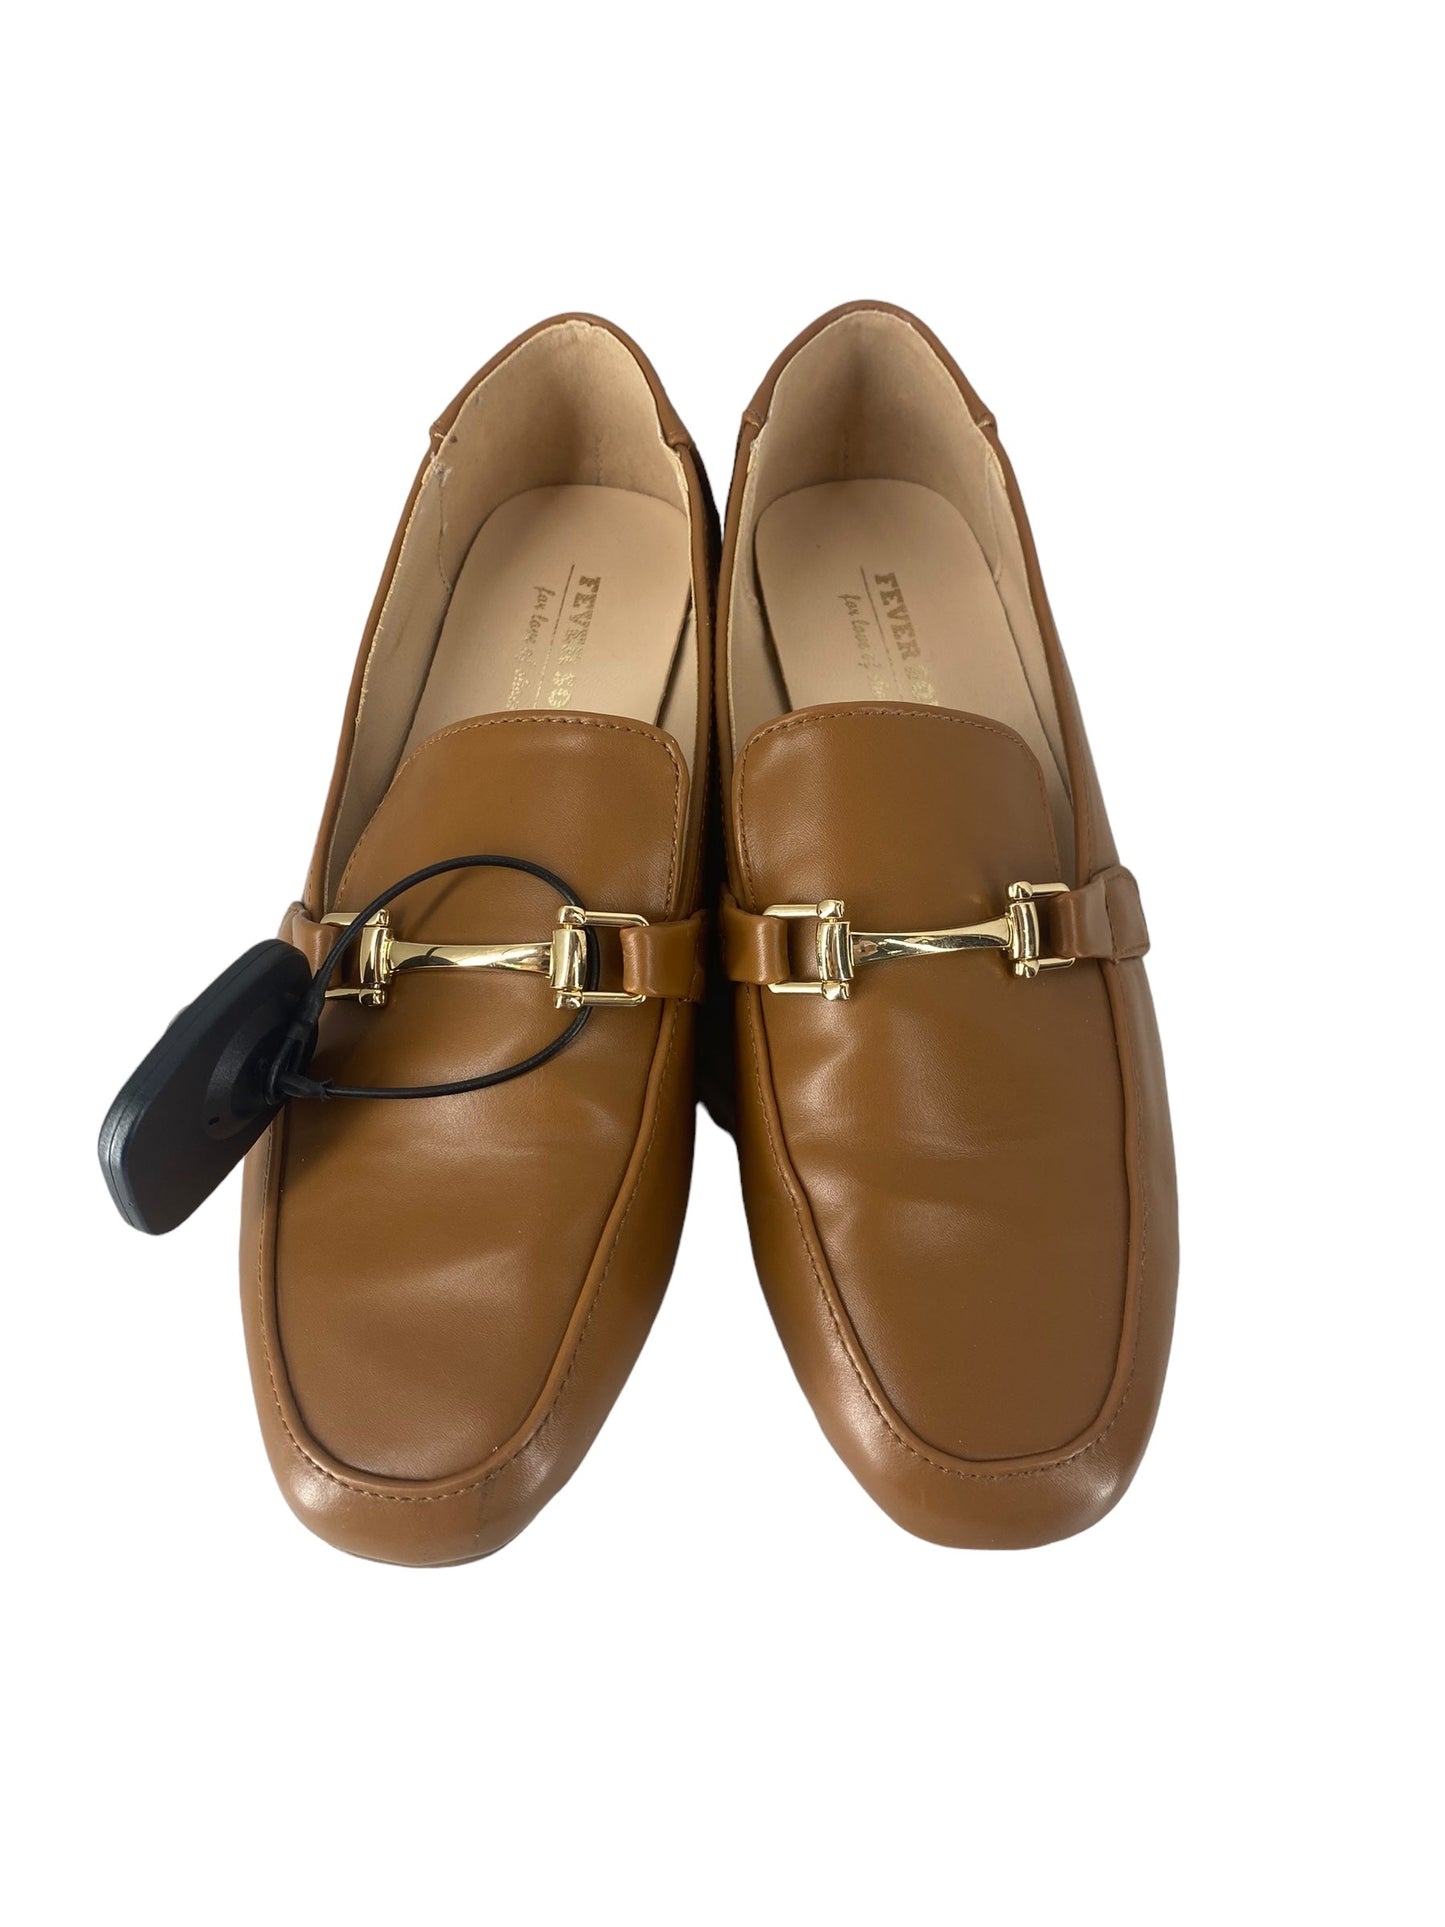 Brown Shoes Flats Clothes Mentor, Size 7.5